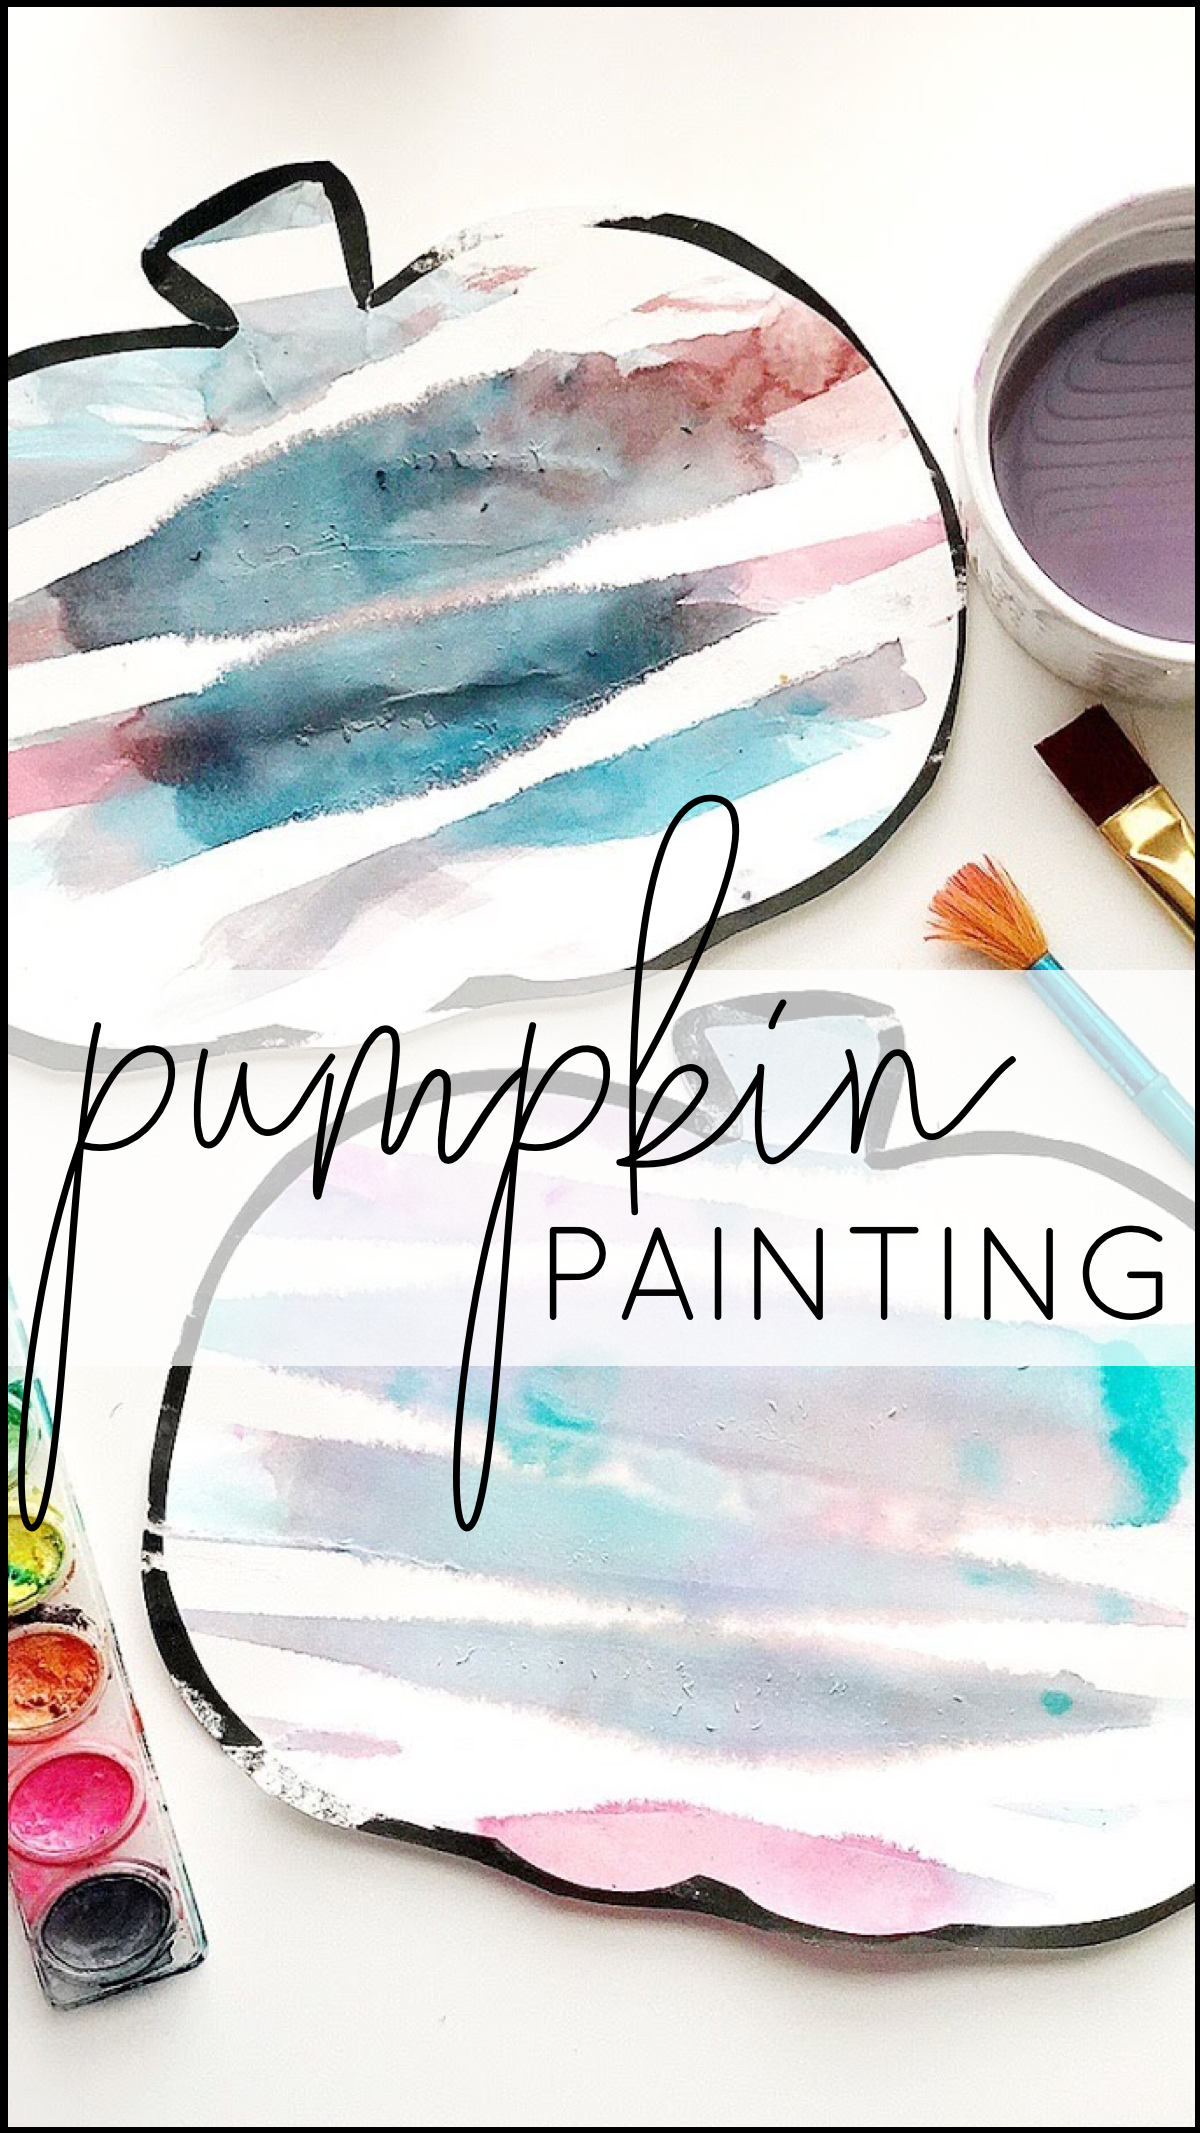 If you need an EASY art activity to do this fall with your kiddos, this pumpkin painting with washi tape is perfect! It requires very little prep, few materials, and is so simple you could even do it with toddlers. Your kiddos will get the chance to practice following directions and exercise their fine motor skills through cutting out the pumpkin outline, the pulling/tearing/smoothing/pinching the tape, and painting the pumpkin. A beautiful pumpkin results that would be beautifully displayed in the hallway at school or on a bulletin board!